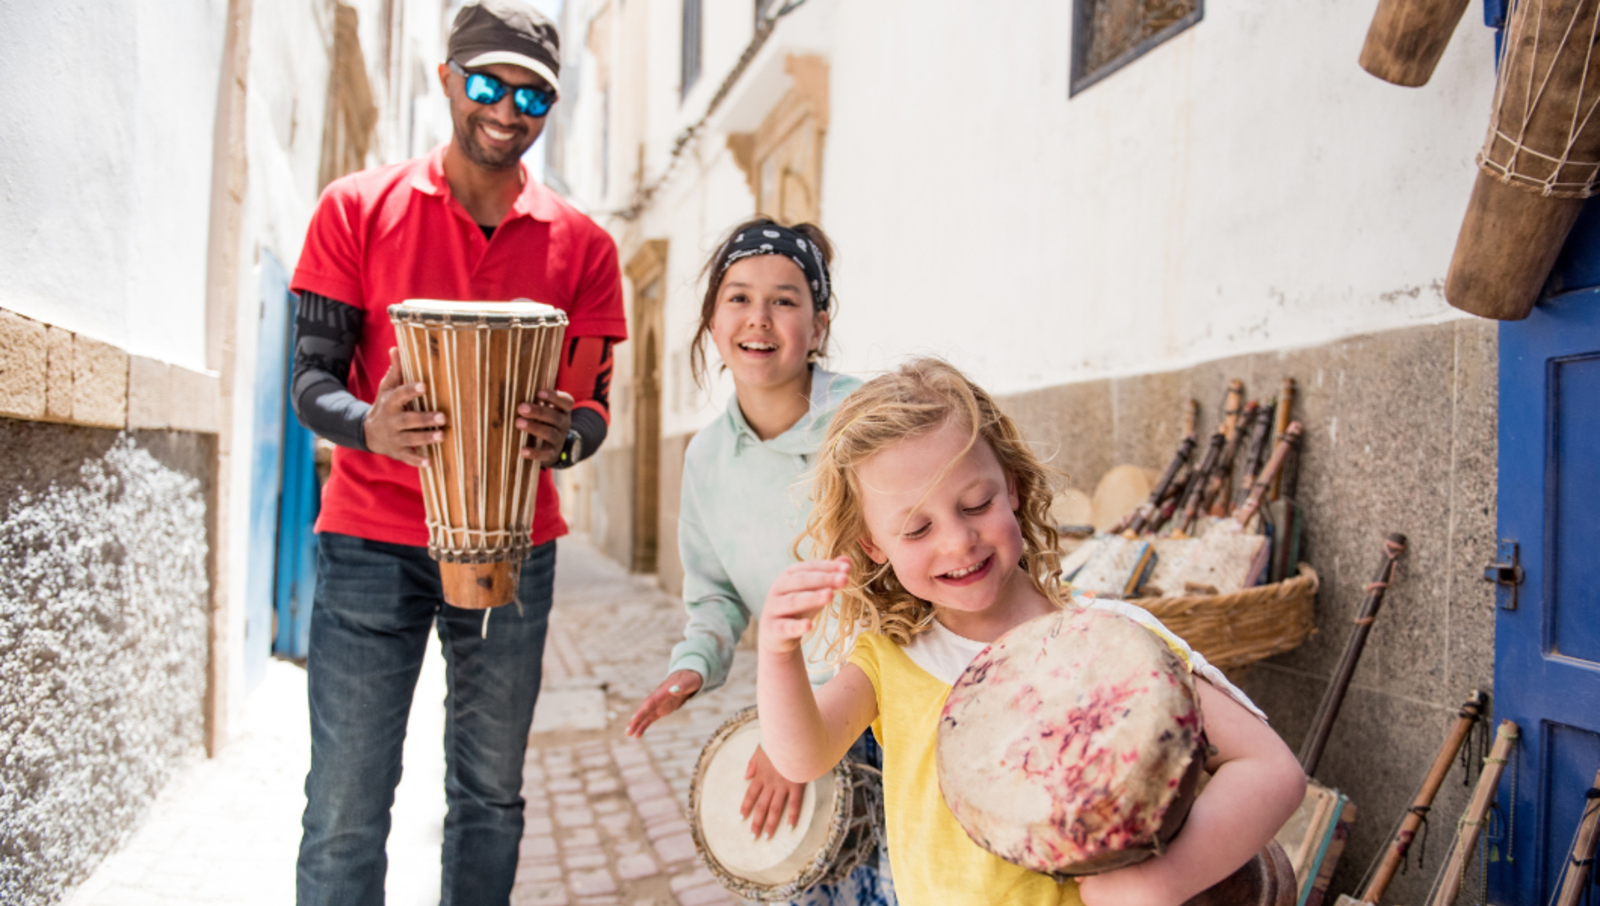 Man holding drum watching two younger girls play drums